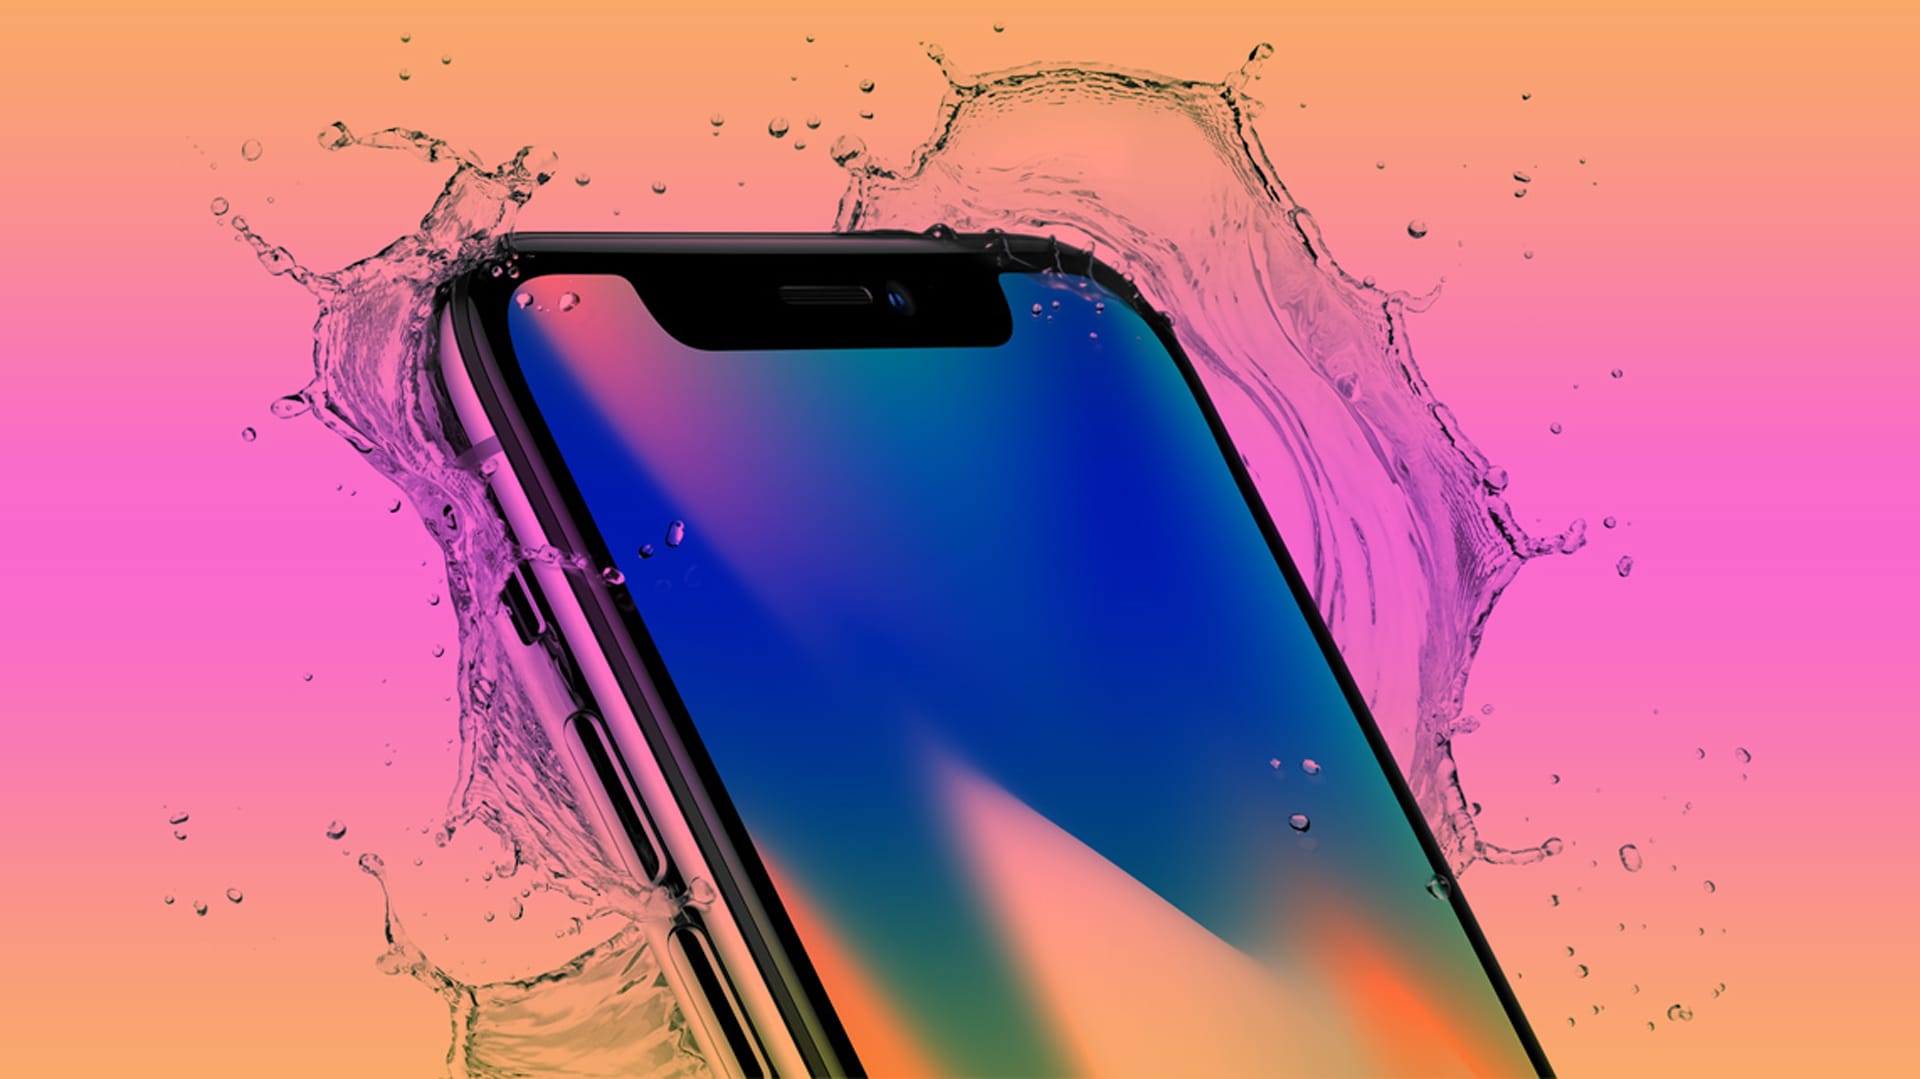 Buying An iPhone X On November 3rd? Mixed Signals Today On Your Odds